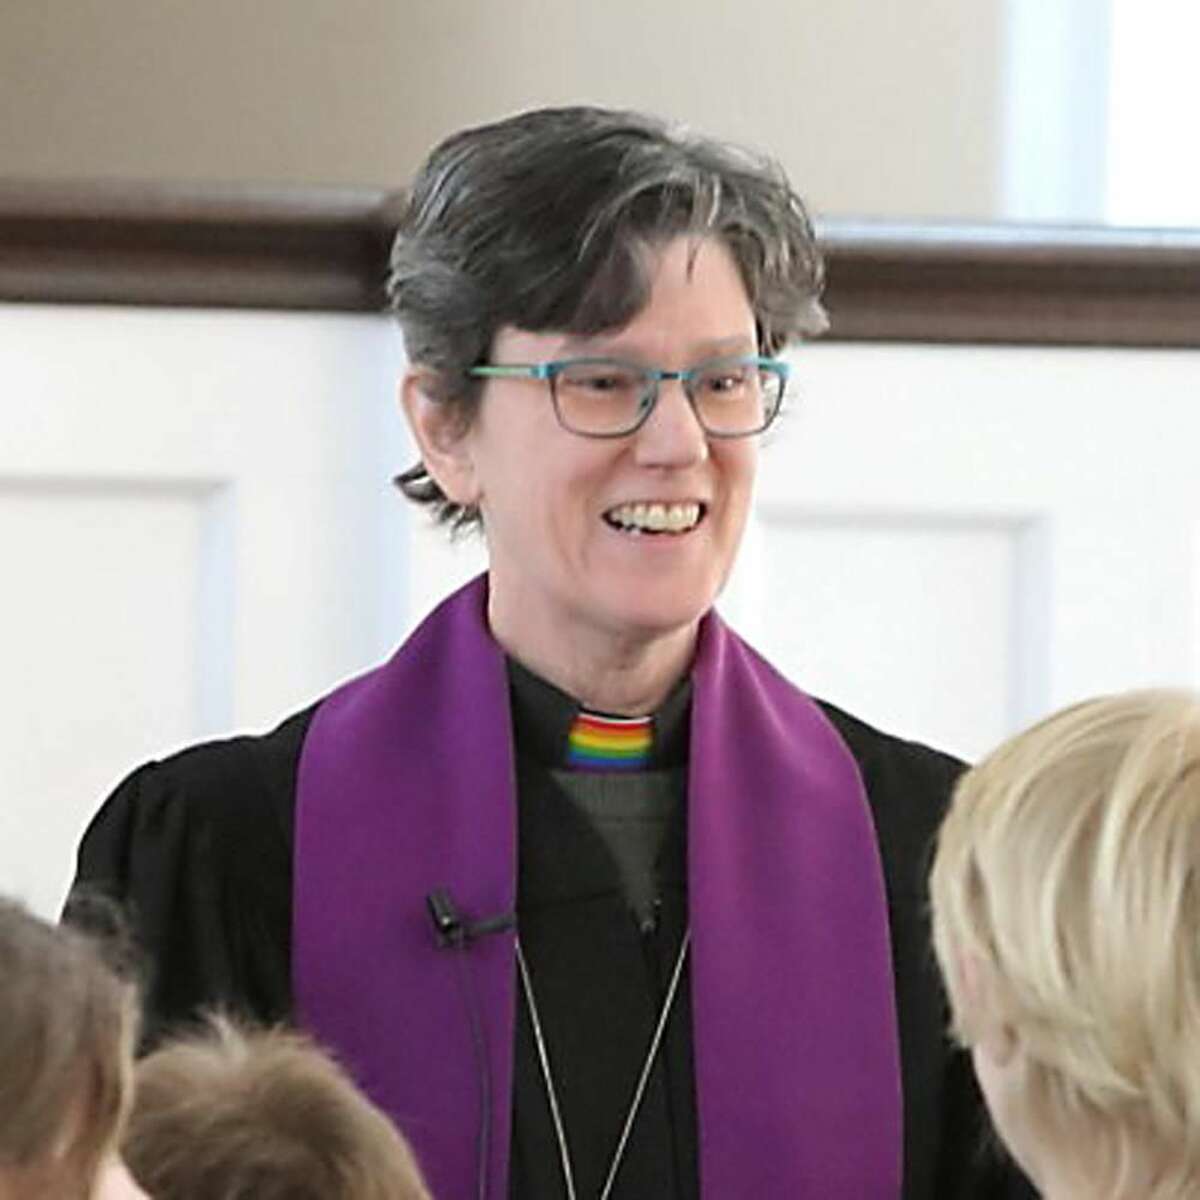 The Rev. Robin Gray will present a series of Broadway-themed sermons at First Congregational Church in Washington.